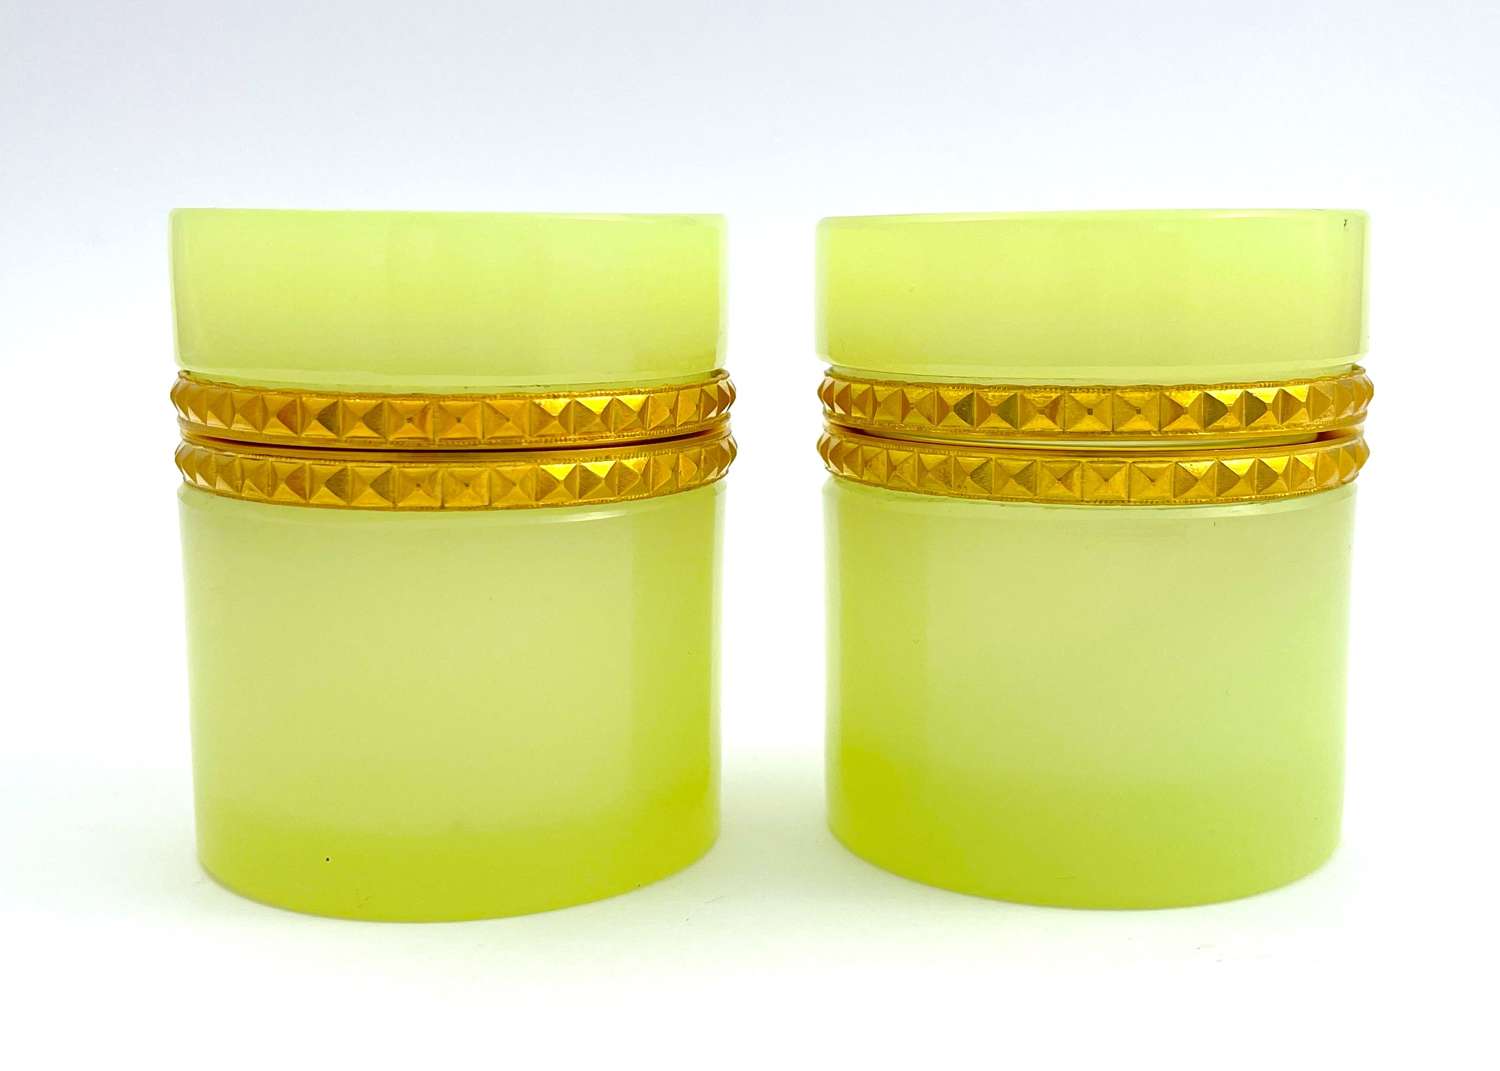 Pair of Small Antique Yellow Opaline Glass Cylindrical Caskets